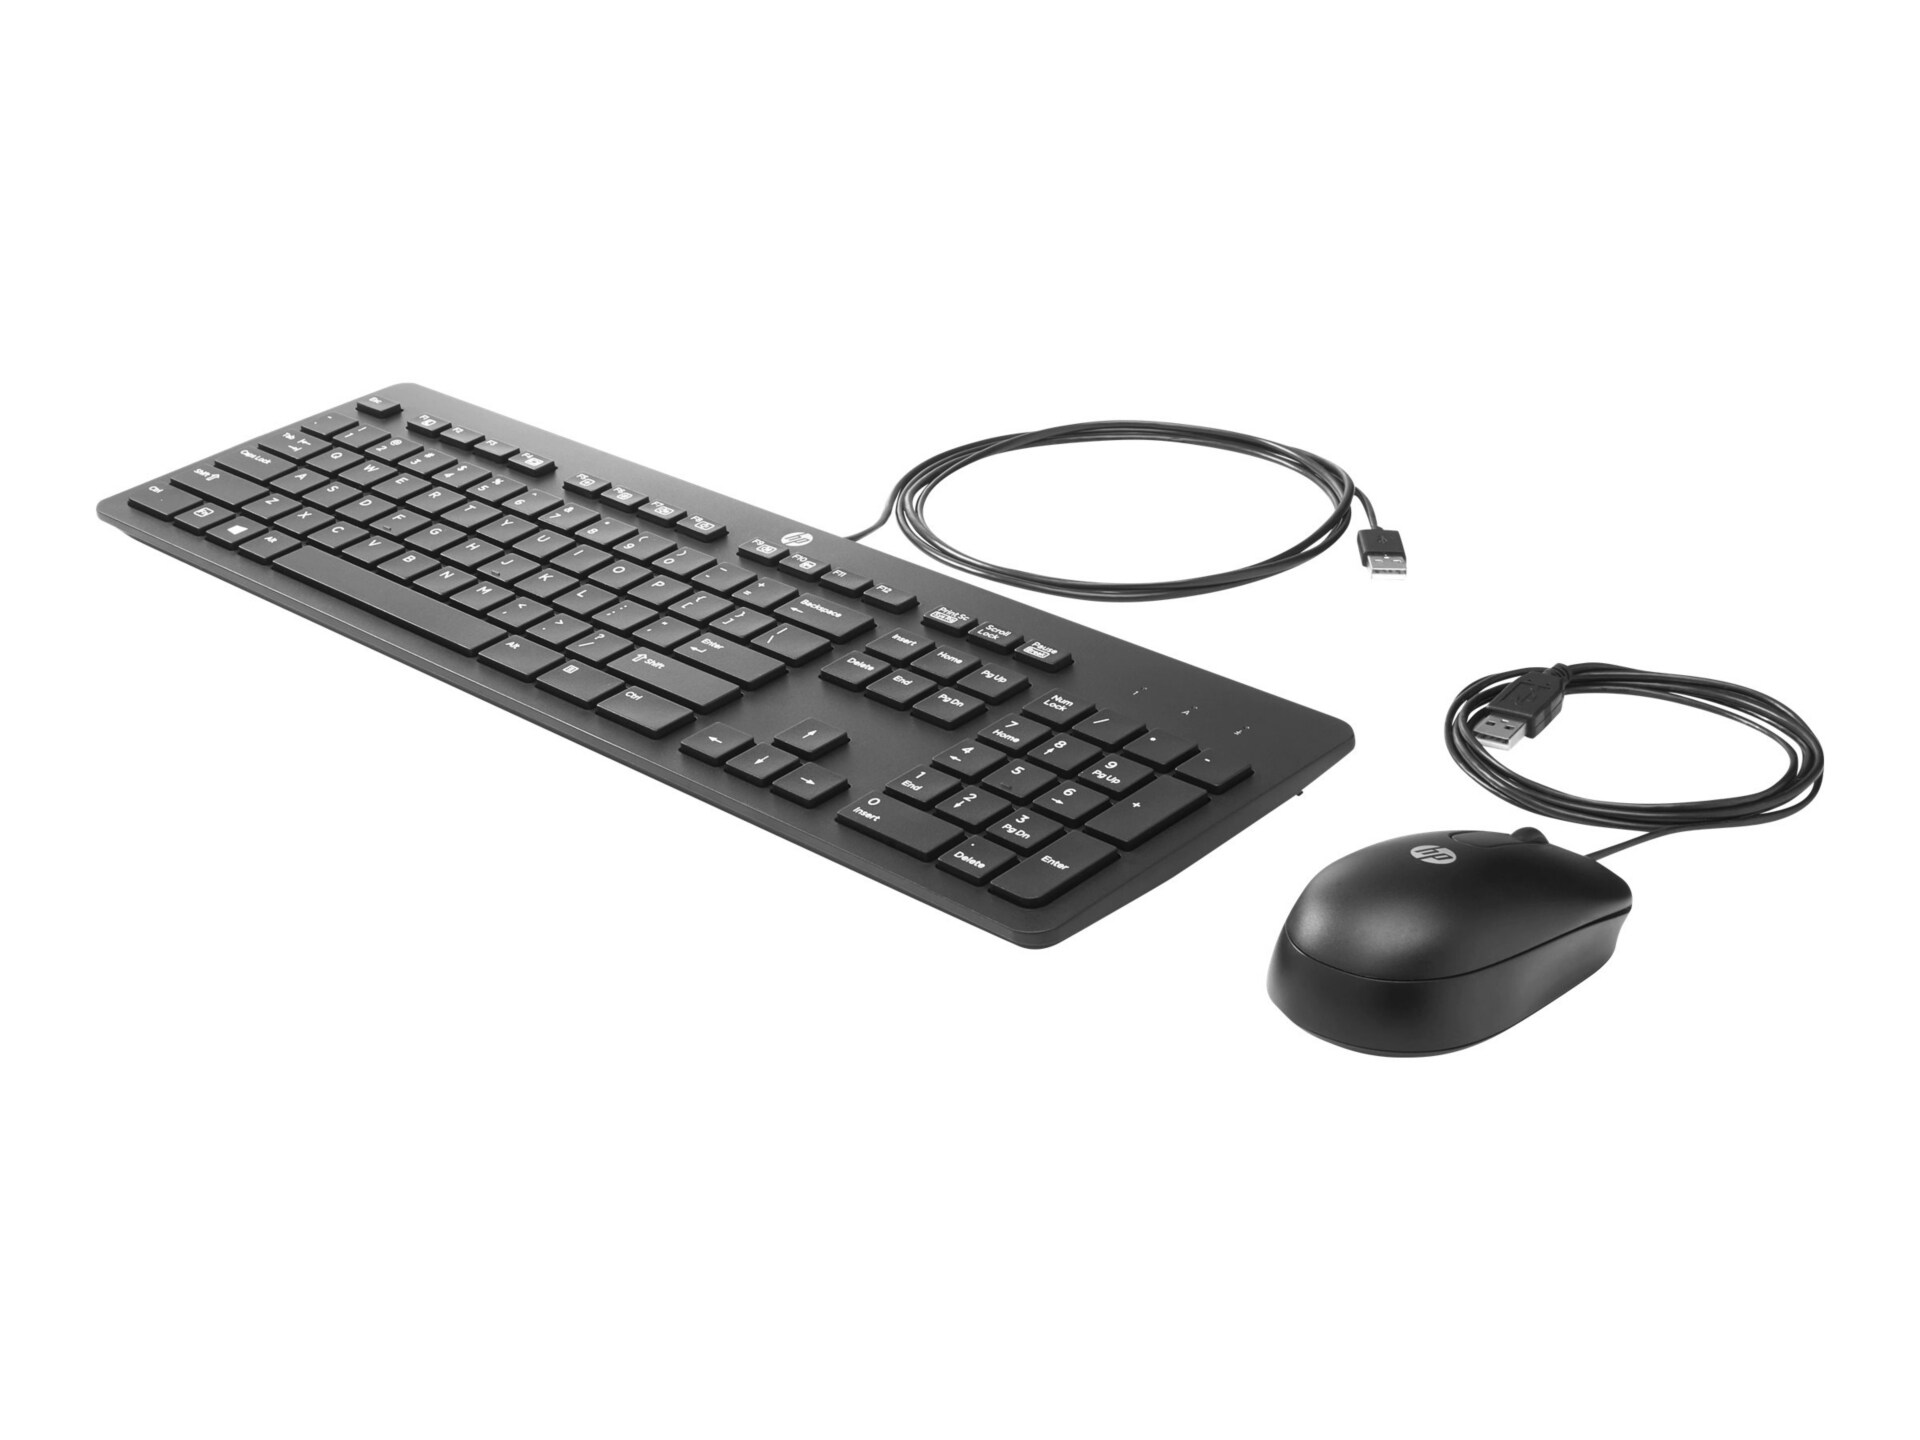 HP Business Slim - keyboard and mouse set - Canadian French